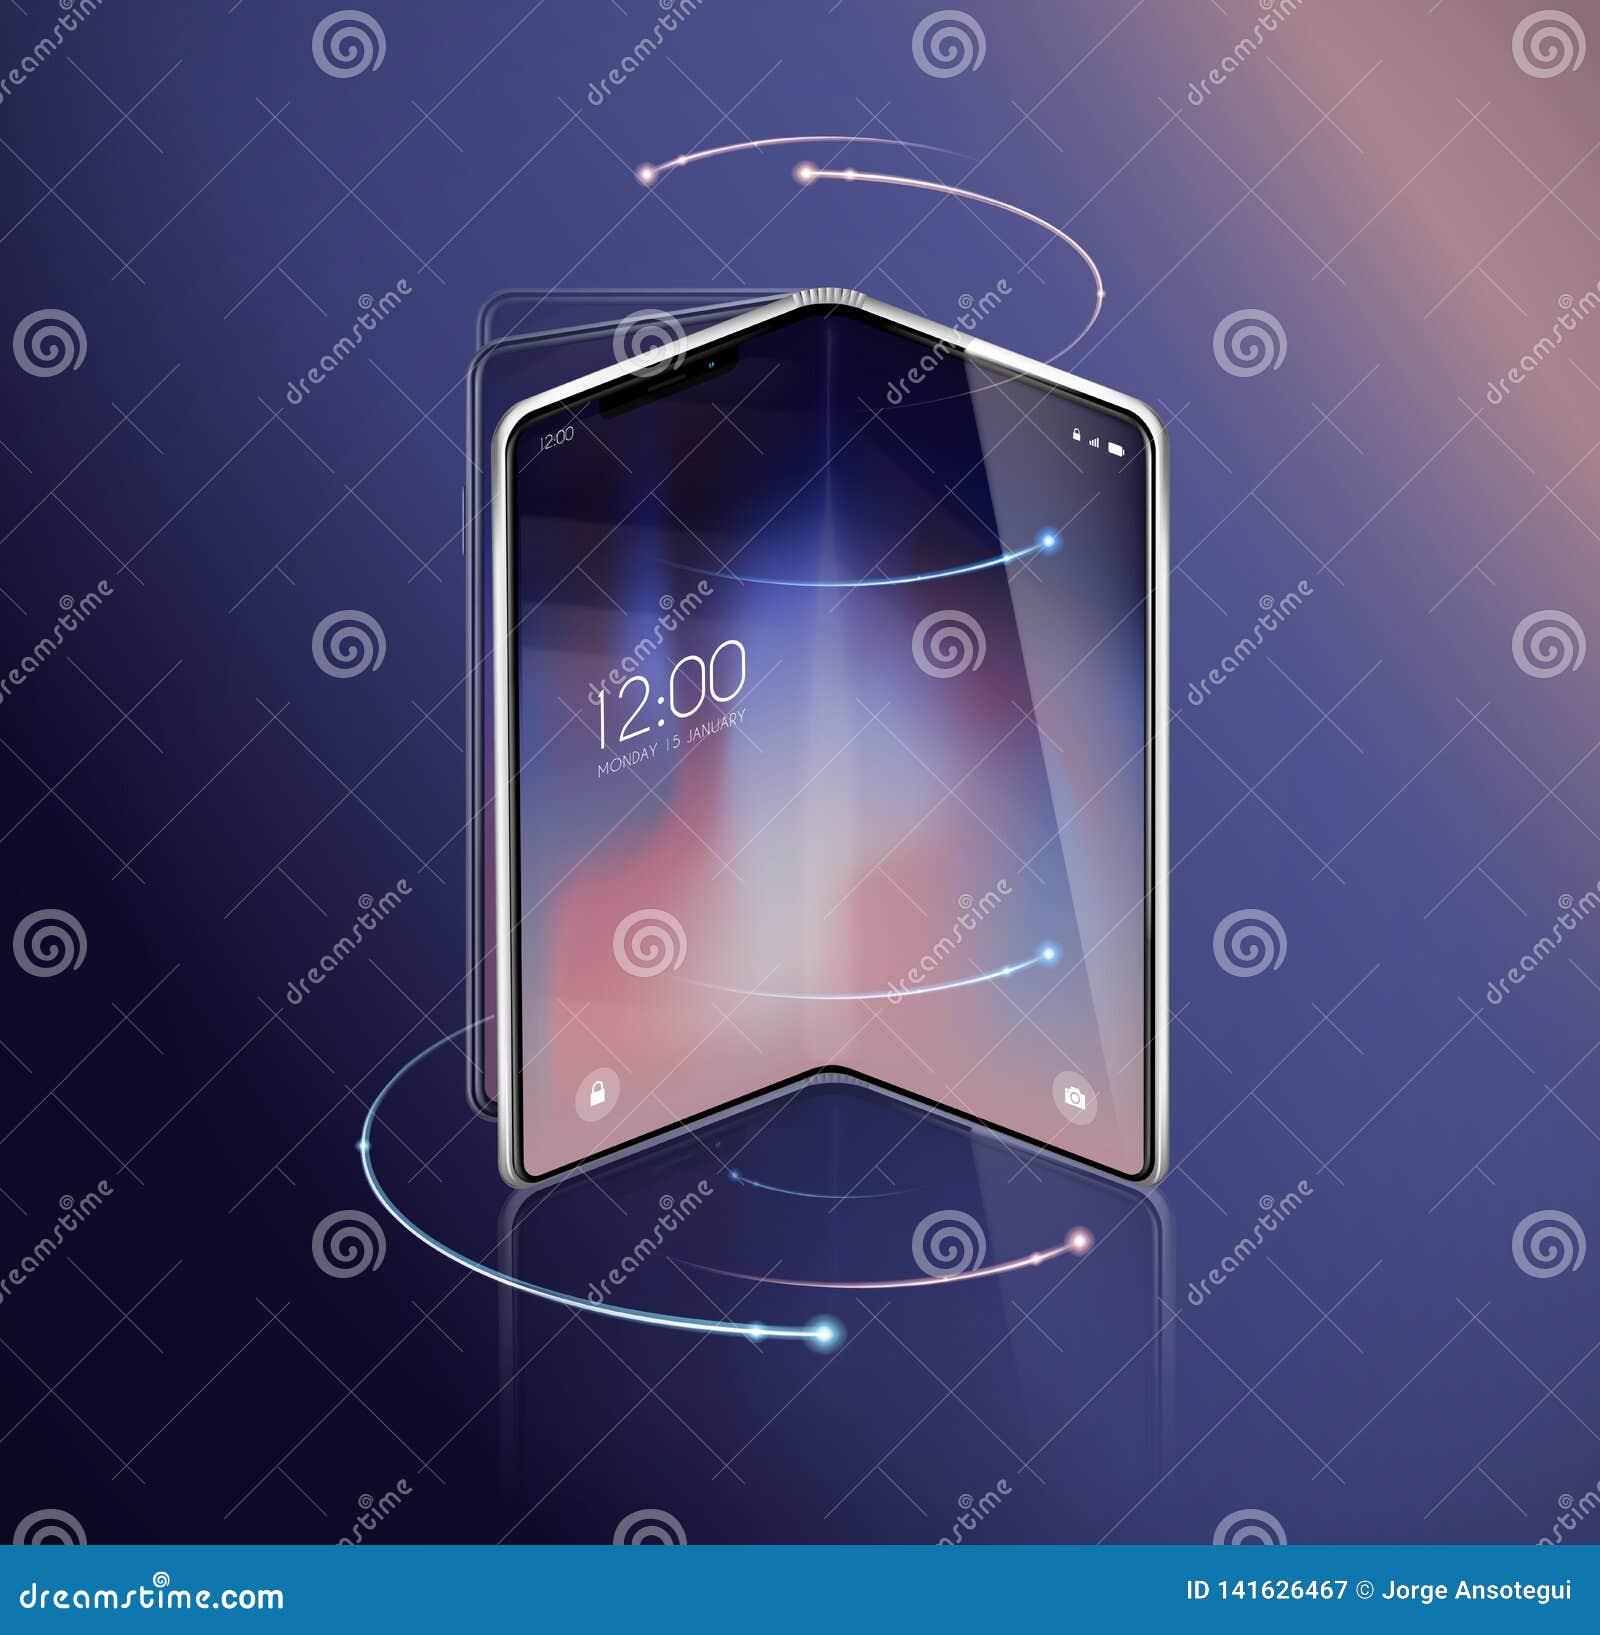 new foldable smartphone concept, prototype with advertisment background and fold, flexible screen. mobile with background and fold